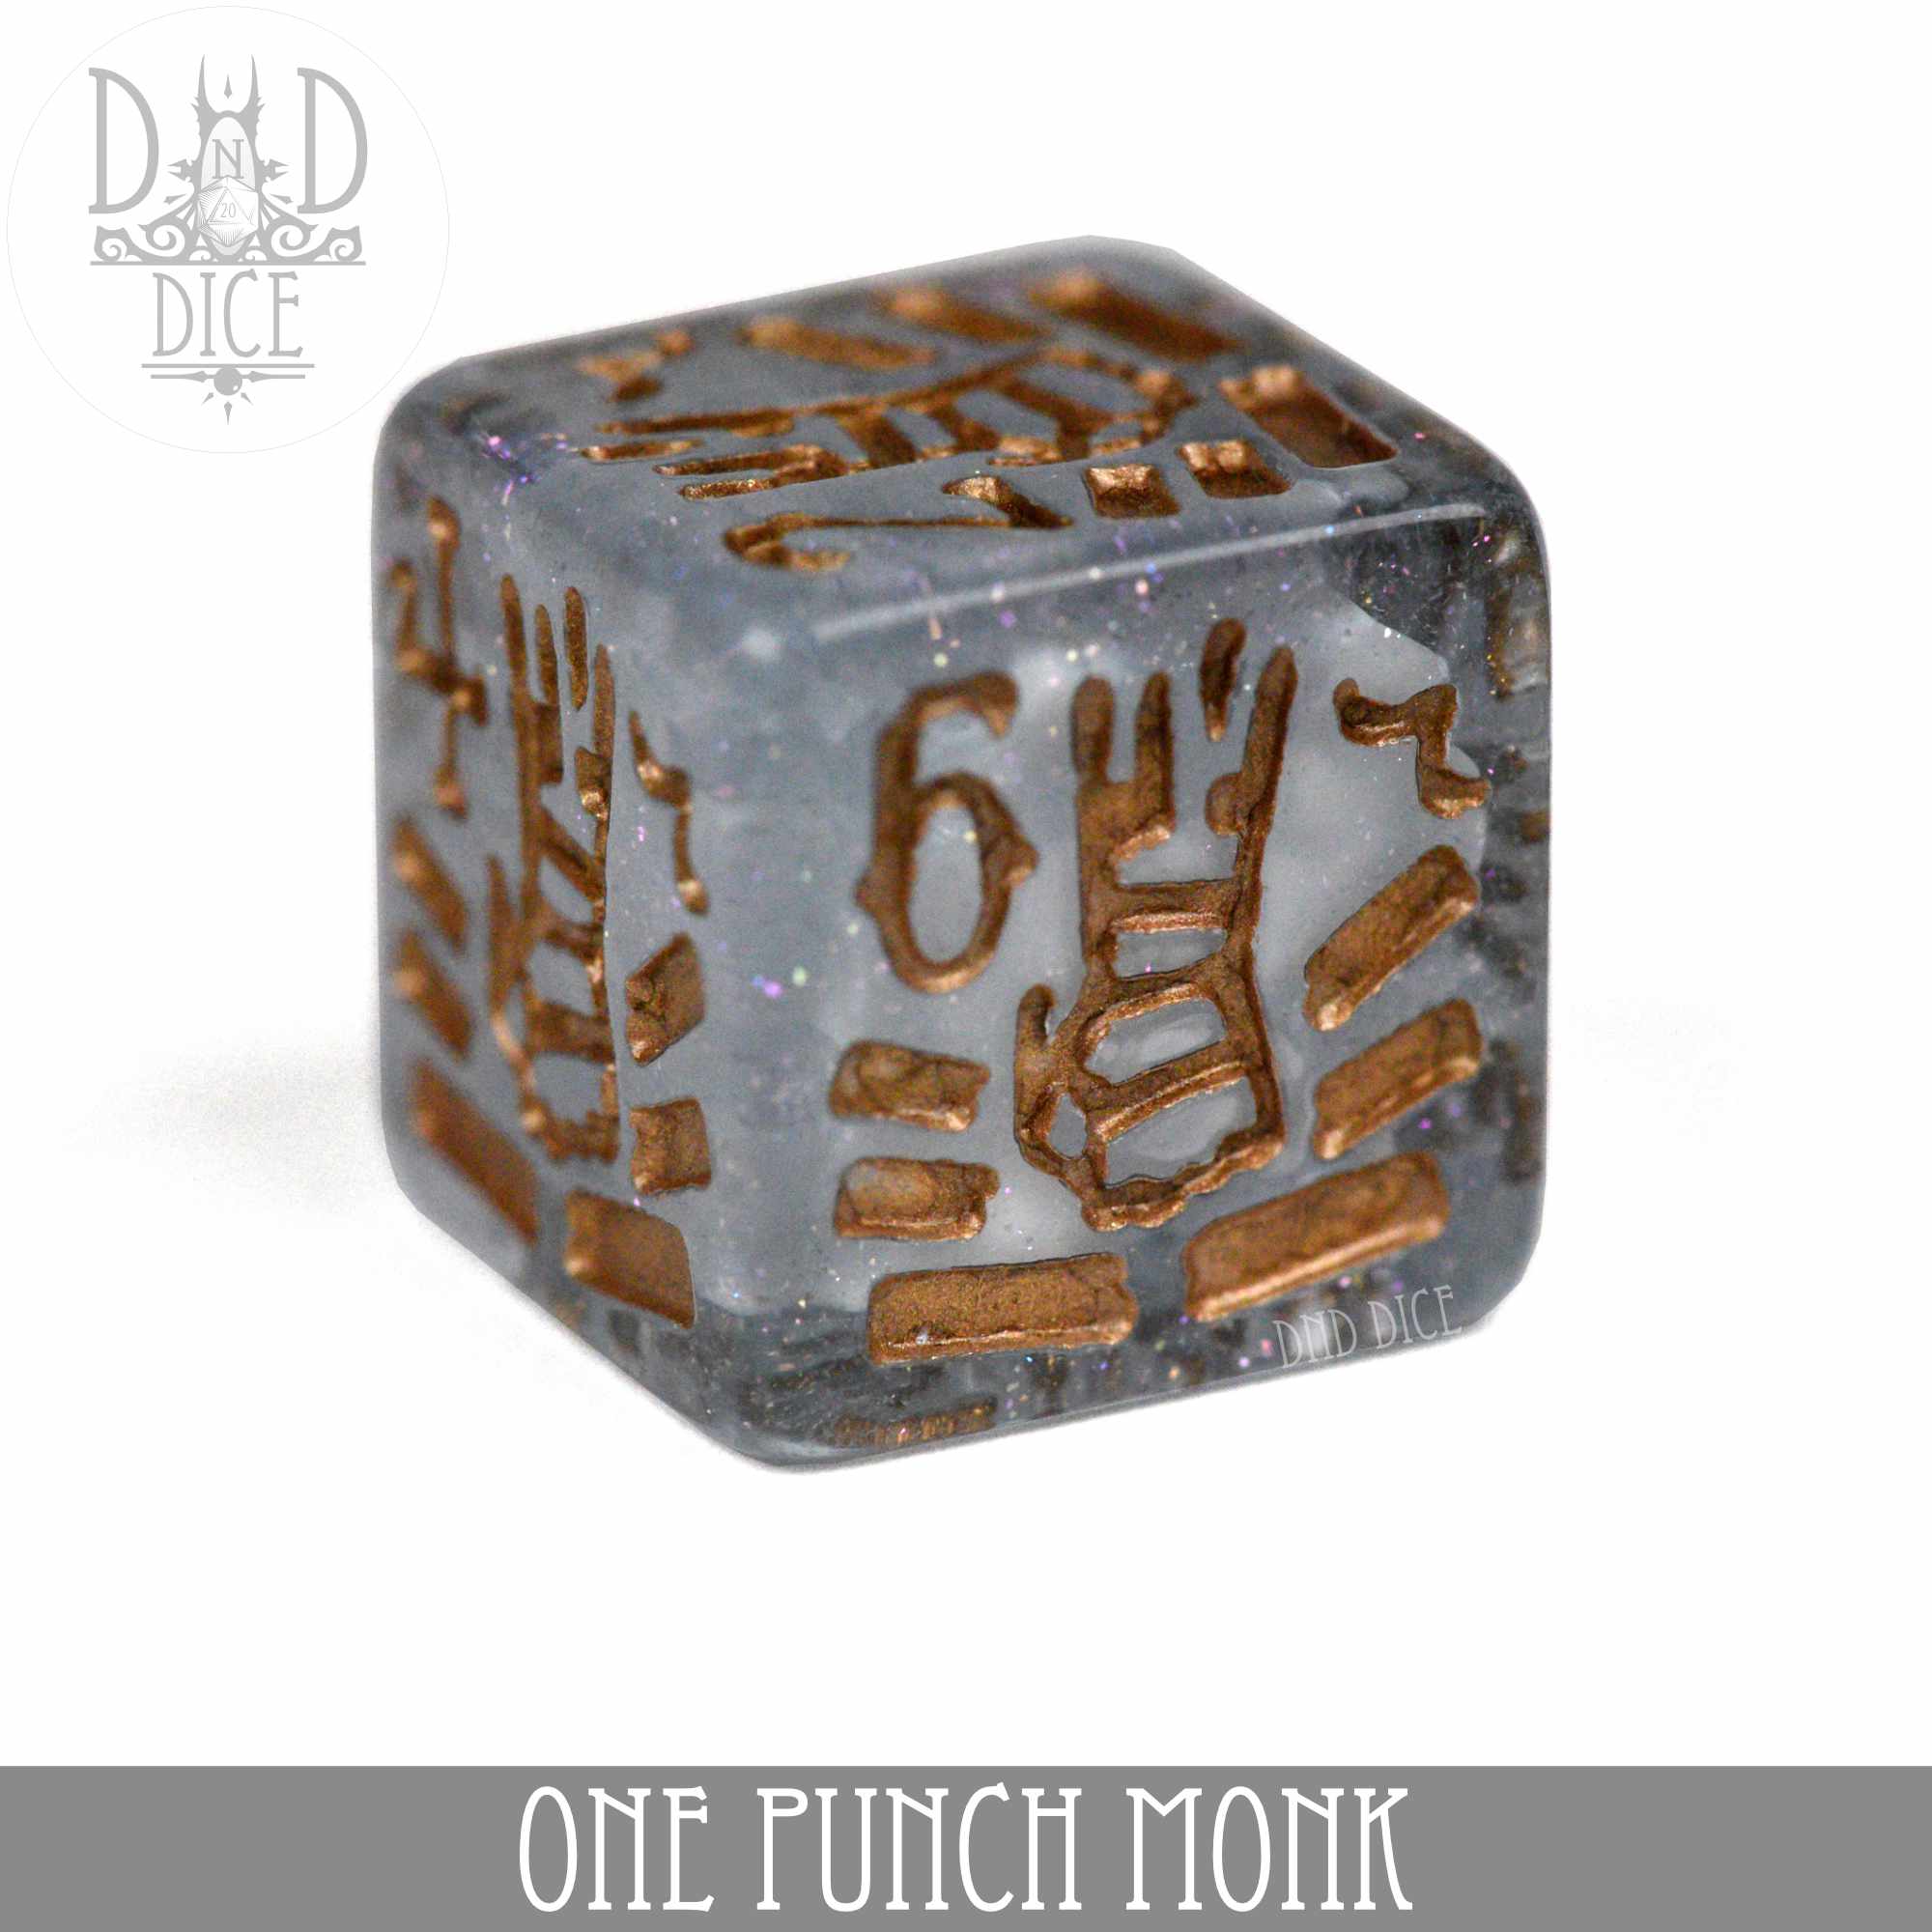 One Punch Monk 11 Dice Set